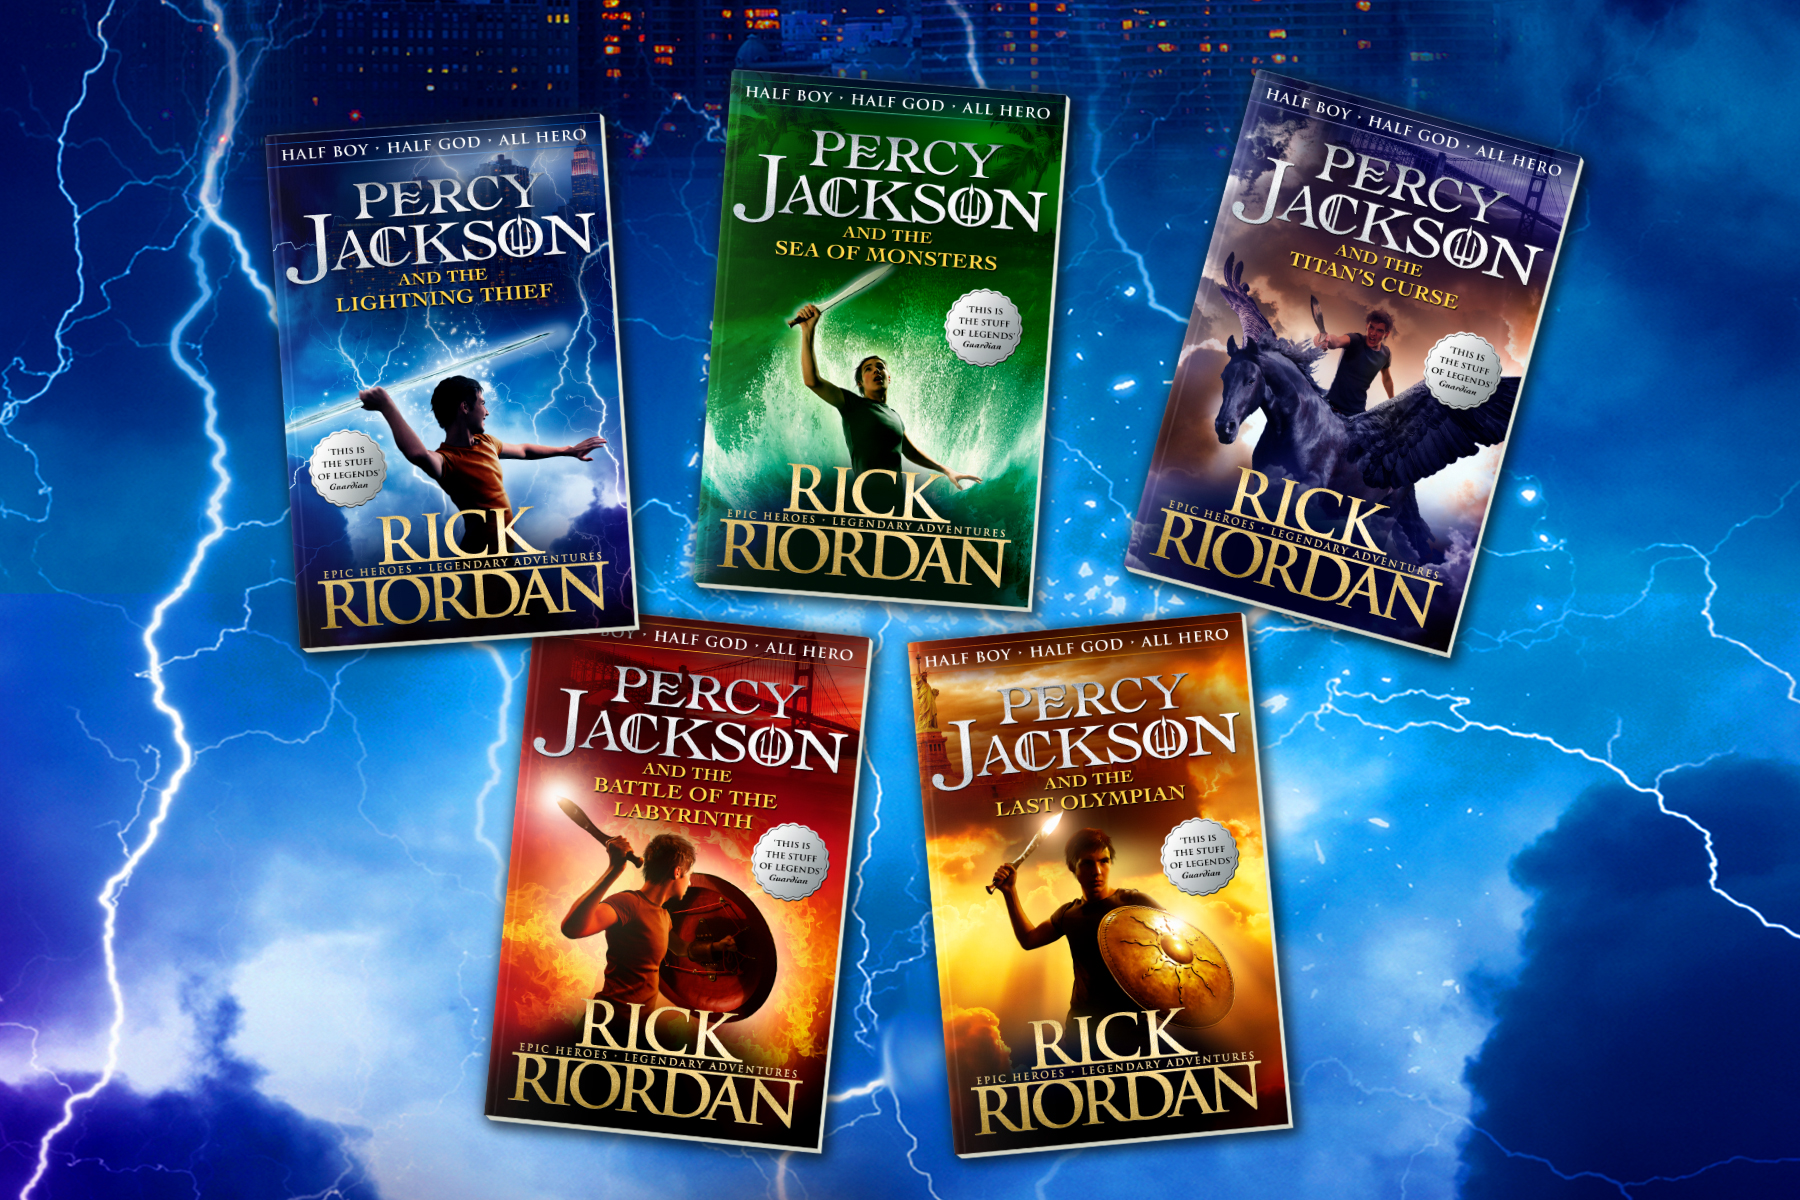 An image showing the five books in the Percy Jackson series on top of a blue and stormy sky with lightning bolts